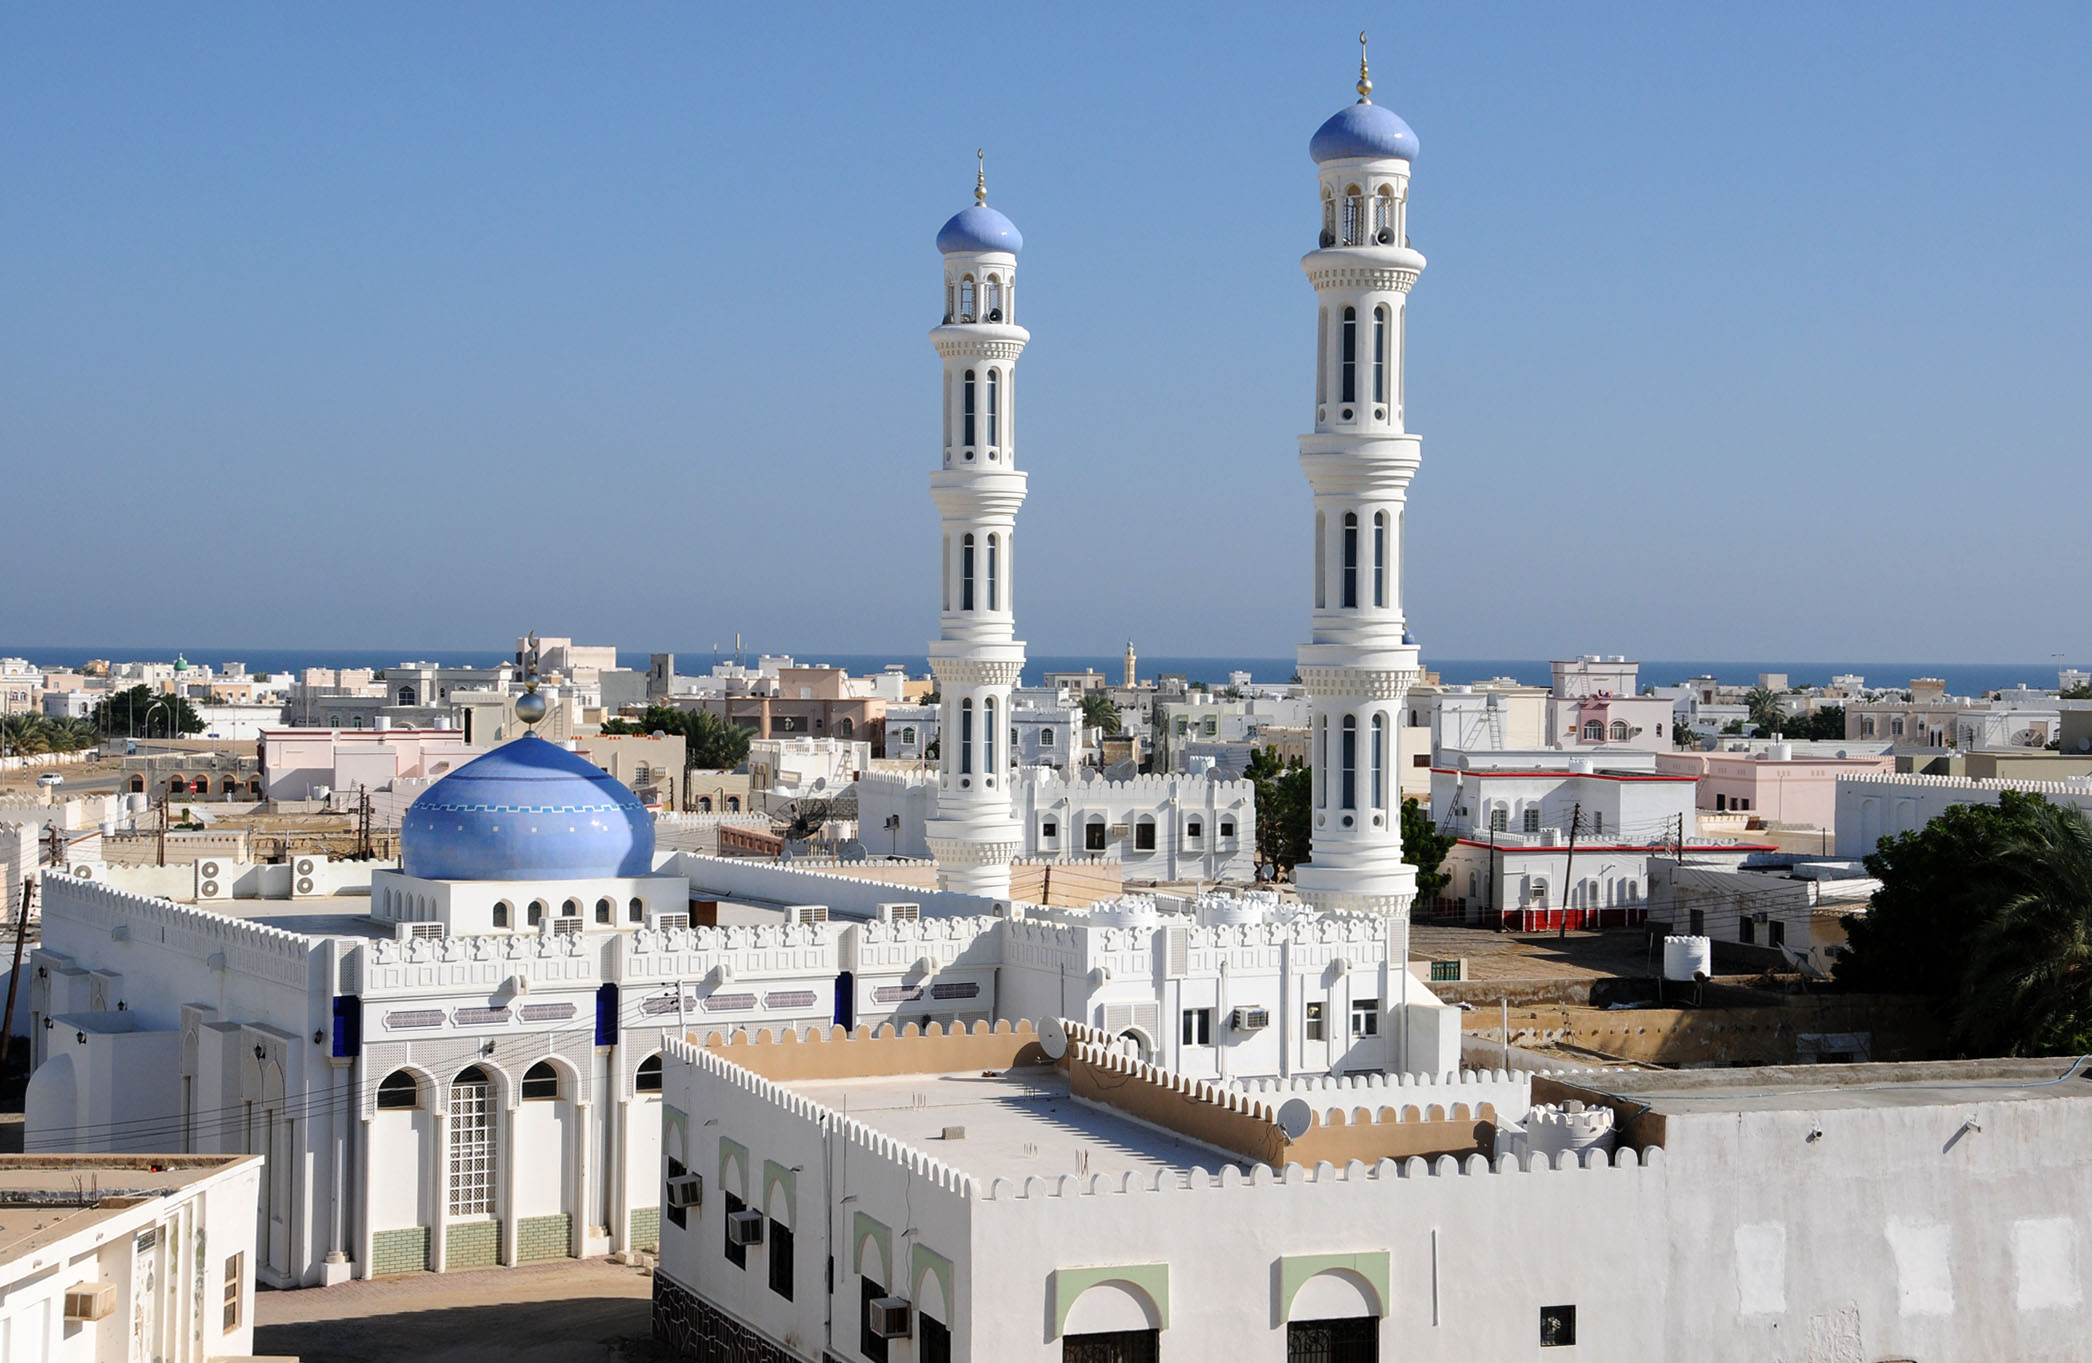 Anjci All Over | In search of peace in Oman